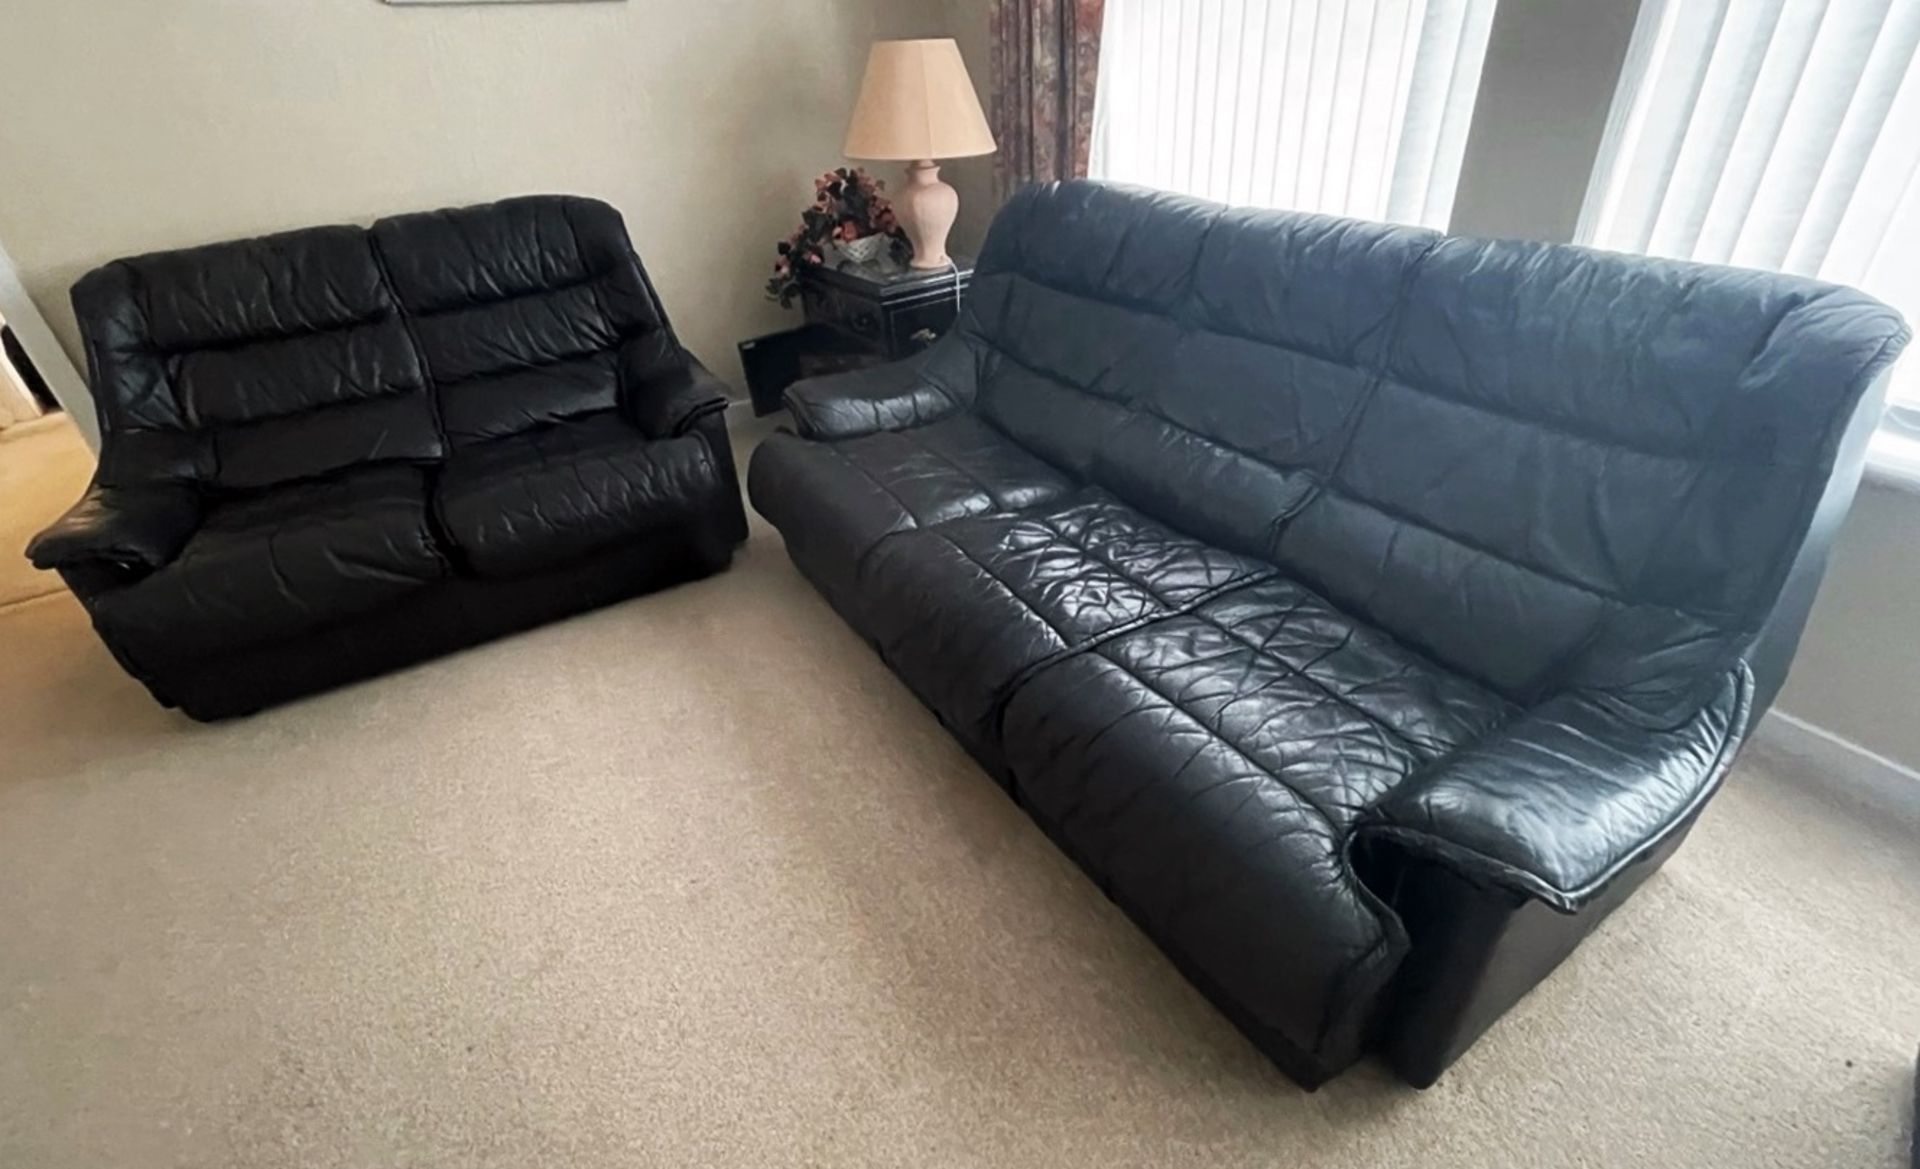 3-Piece Sofa Set In Black - Includes 1 x 3-Seater Sofa, 1 x 2-Seater Sofa & 1 x Footstool - From